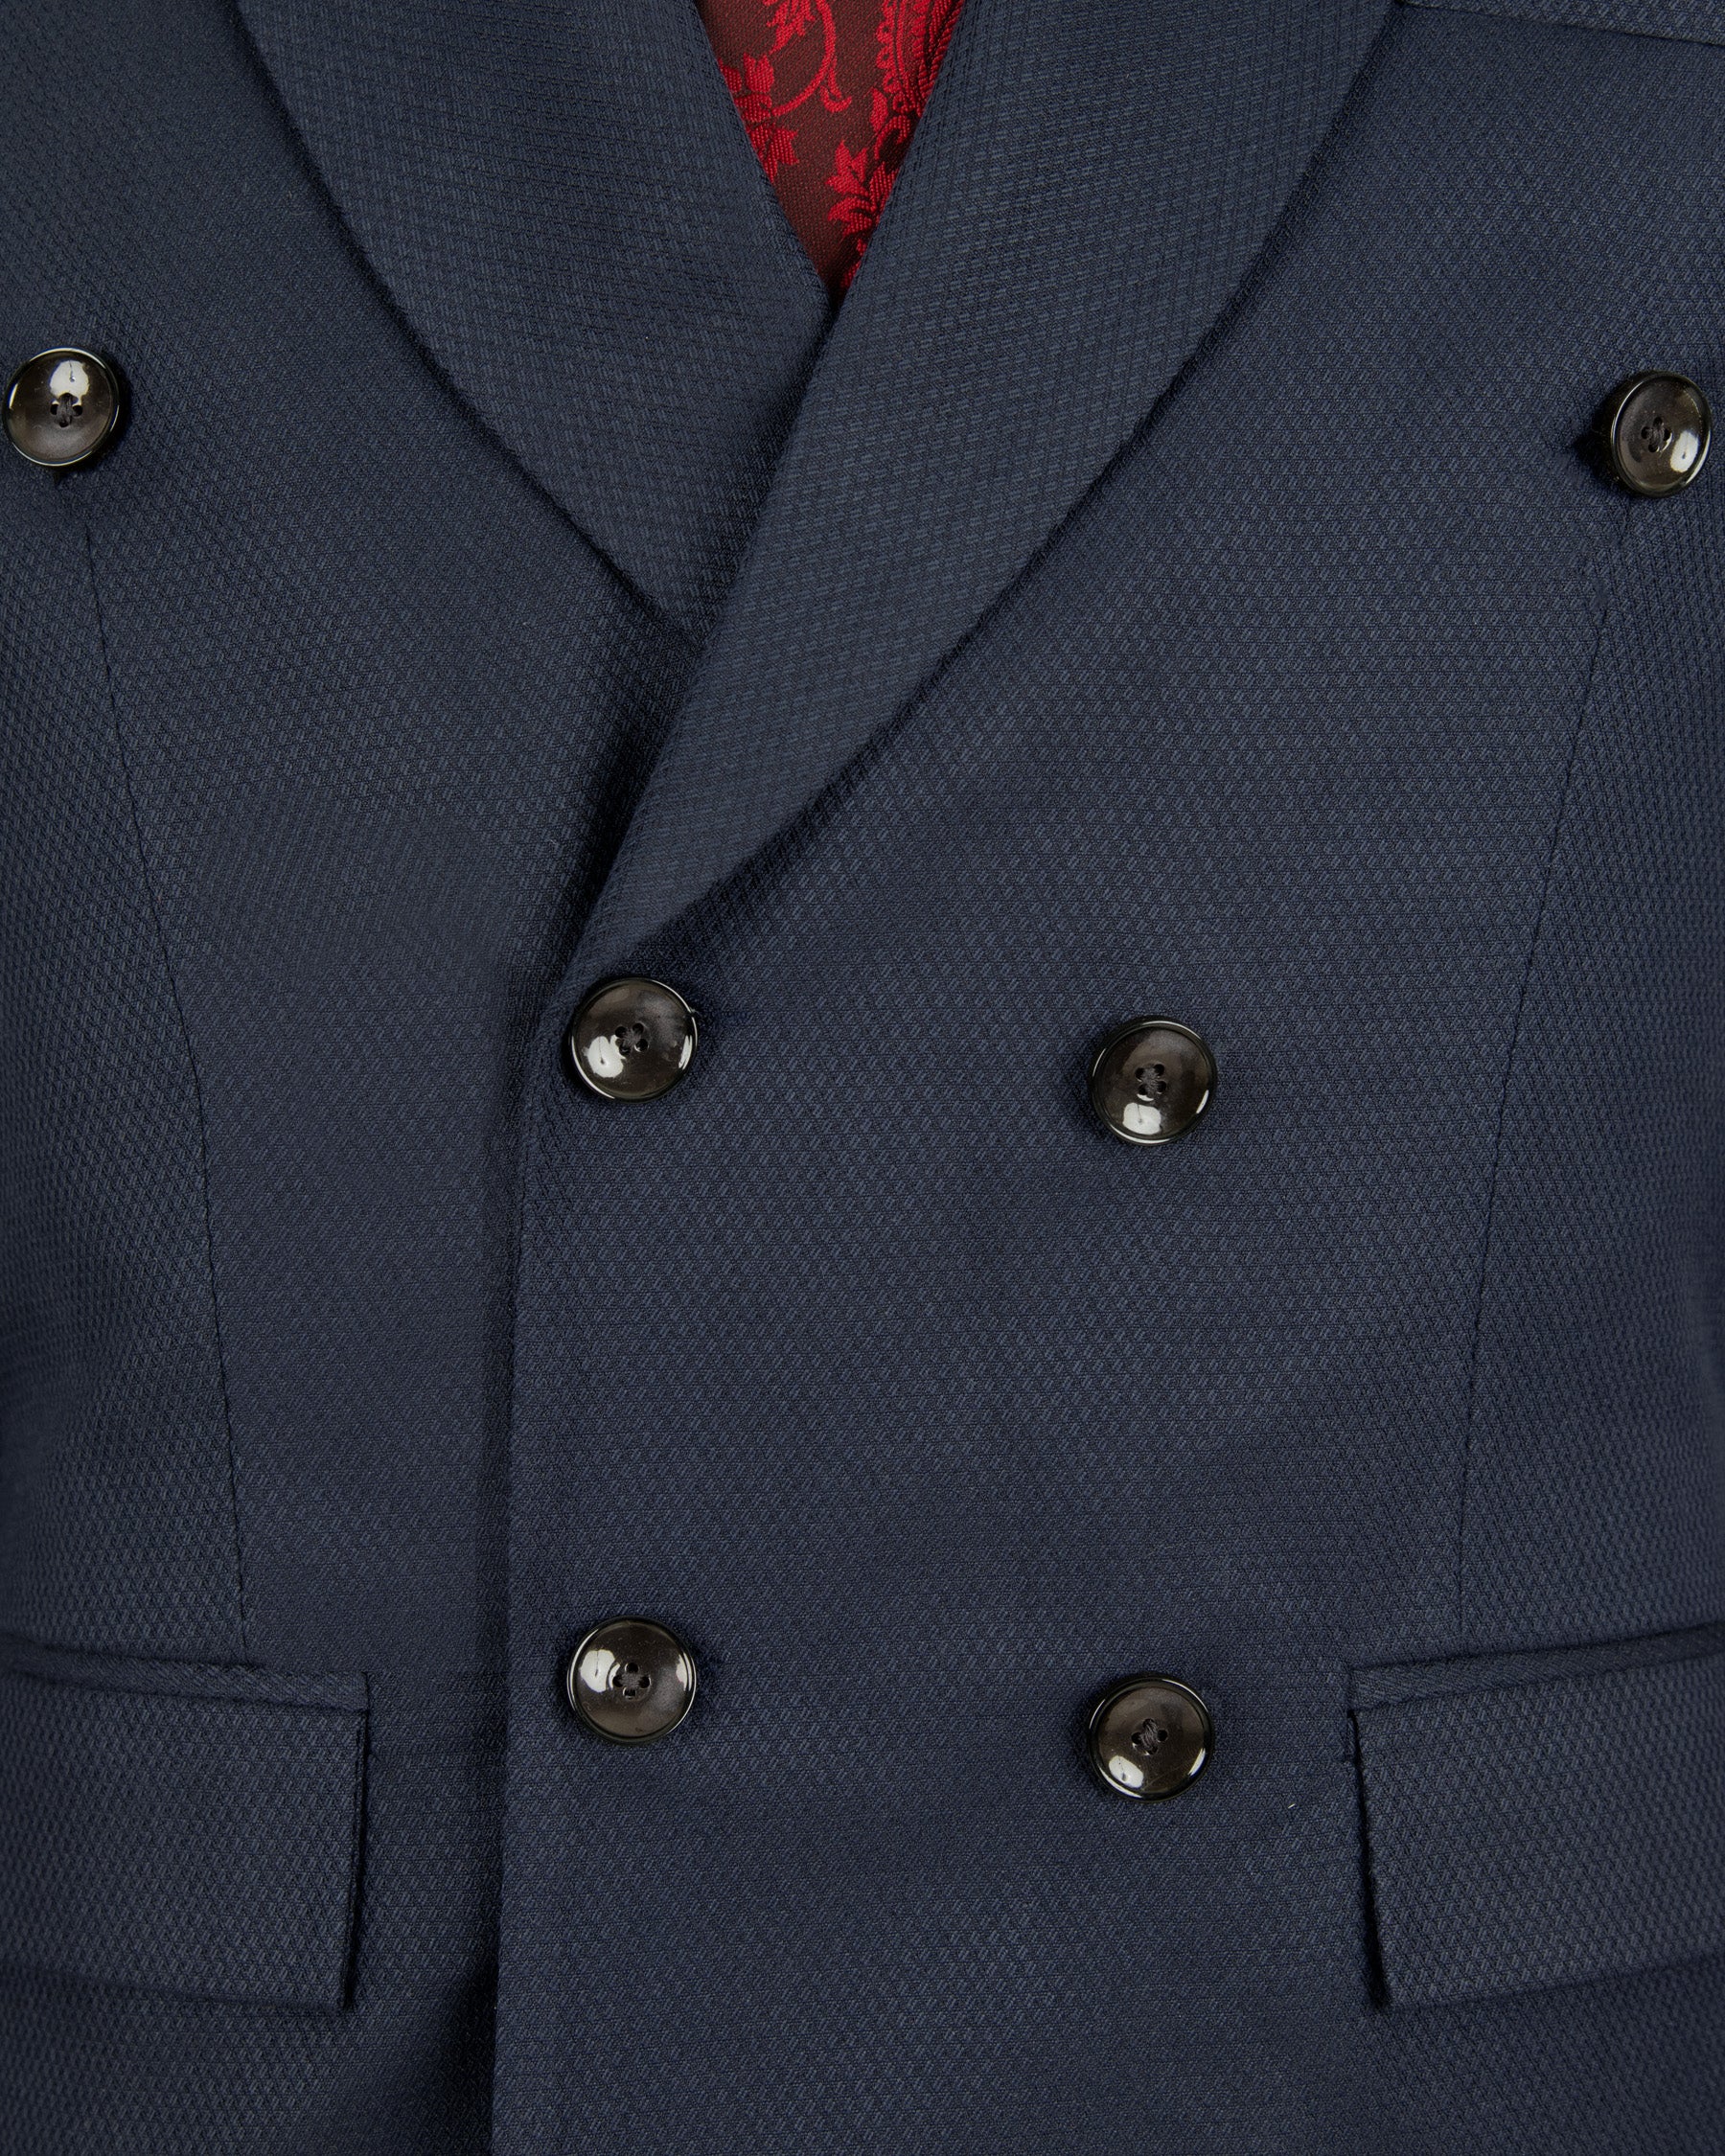 Royal Blue Wool-rich Double-breasted Sports Suit